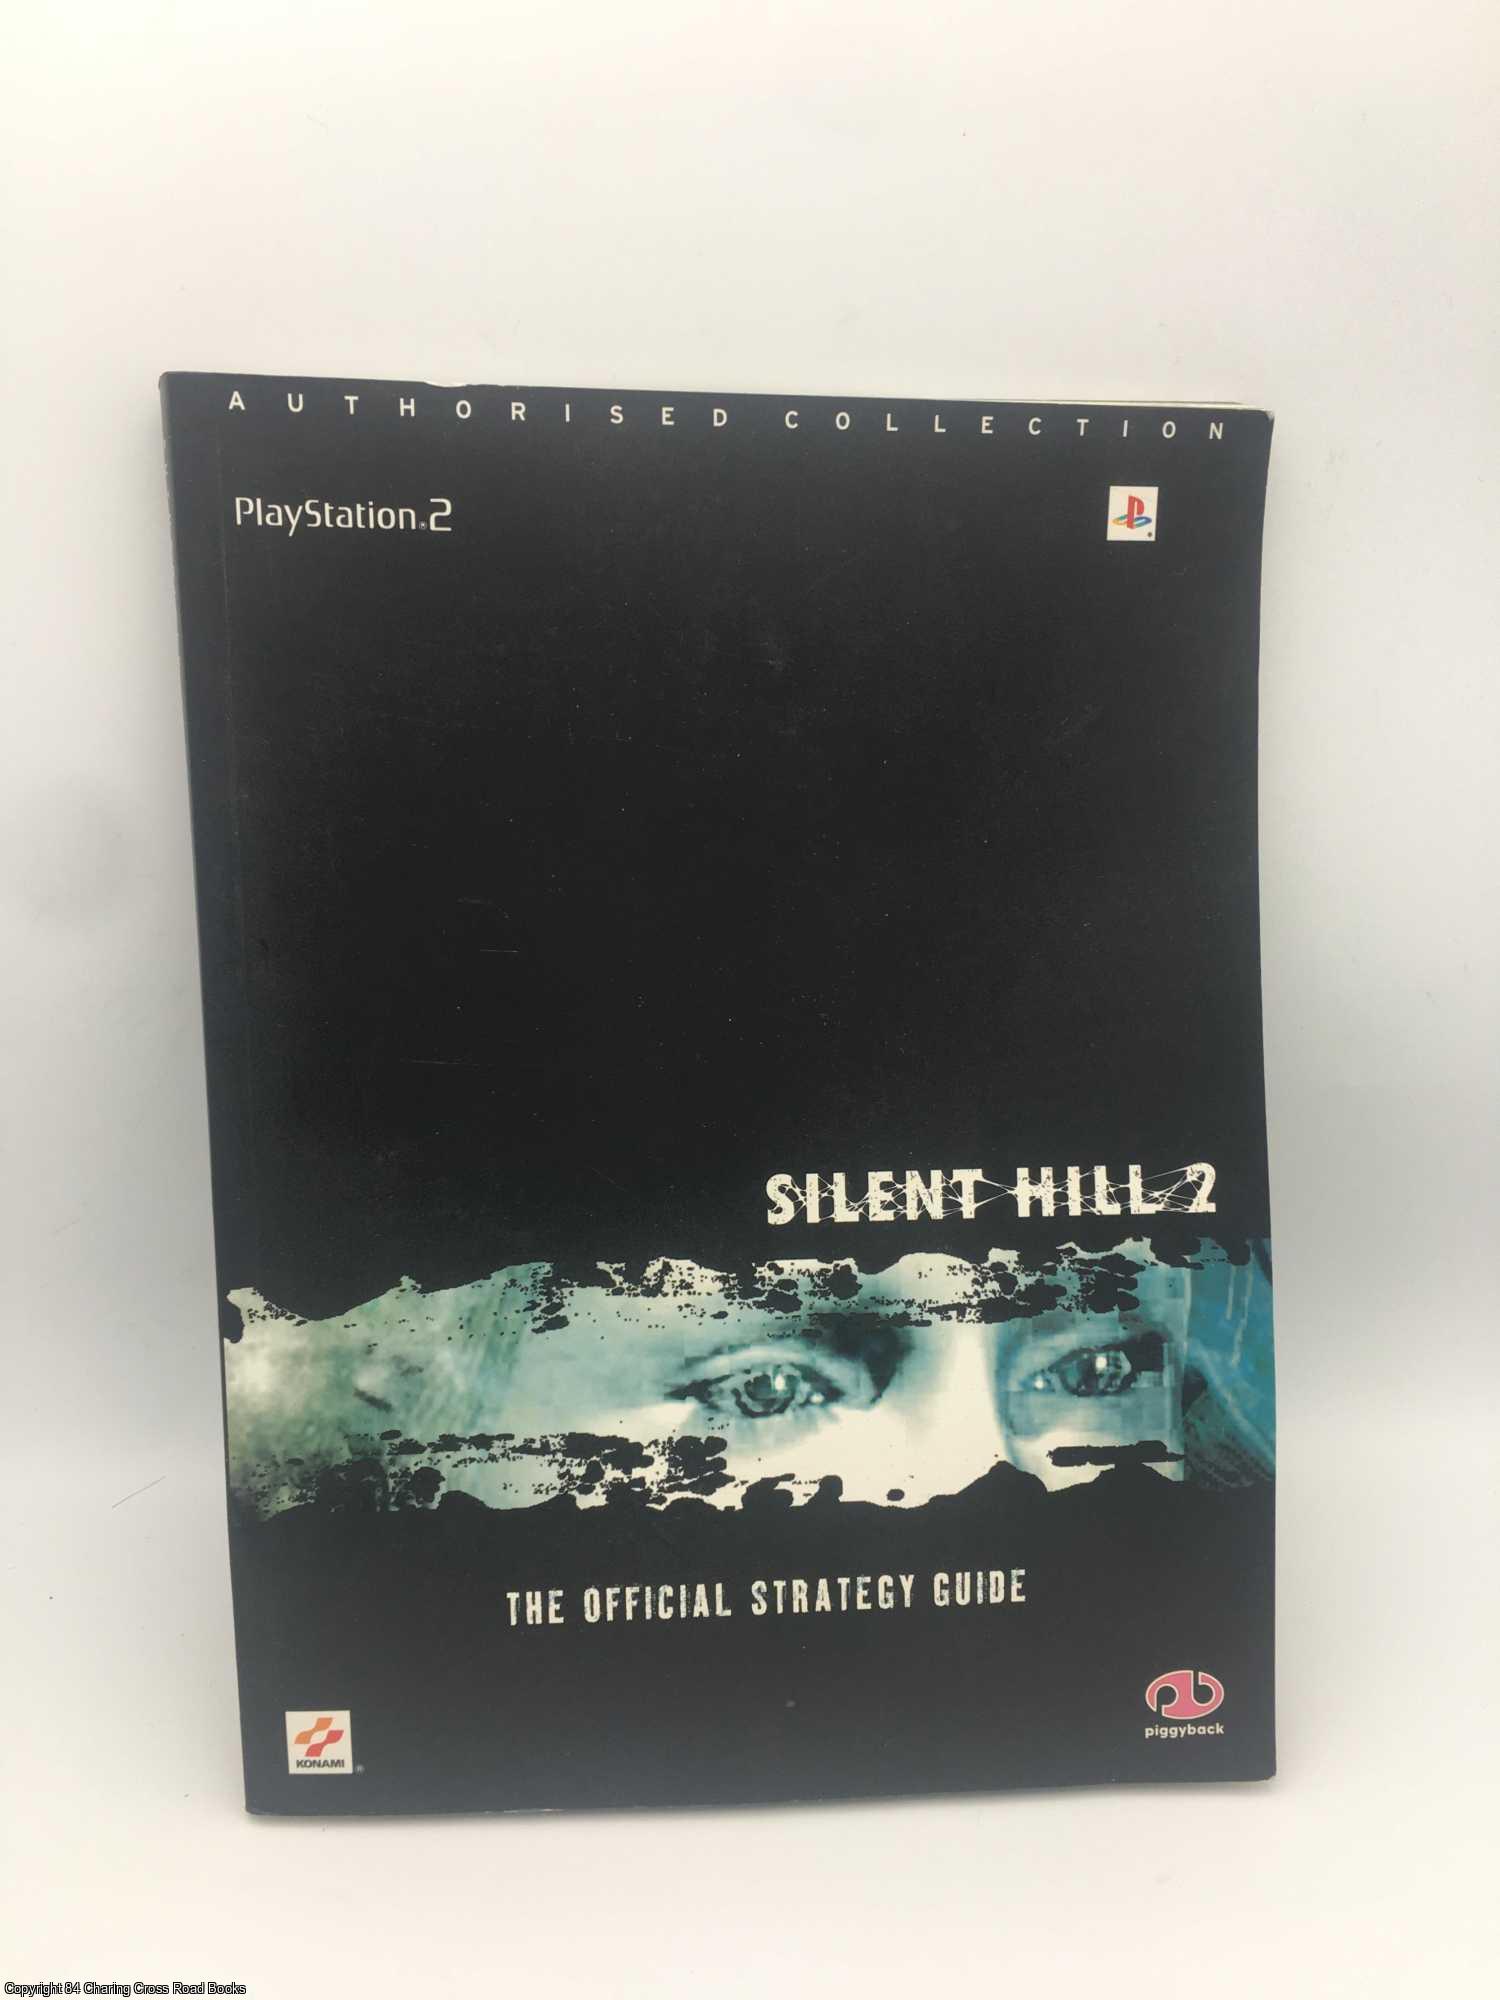 Piggyback - Silent Hill 2: The Official Strategy Guide